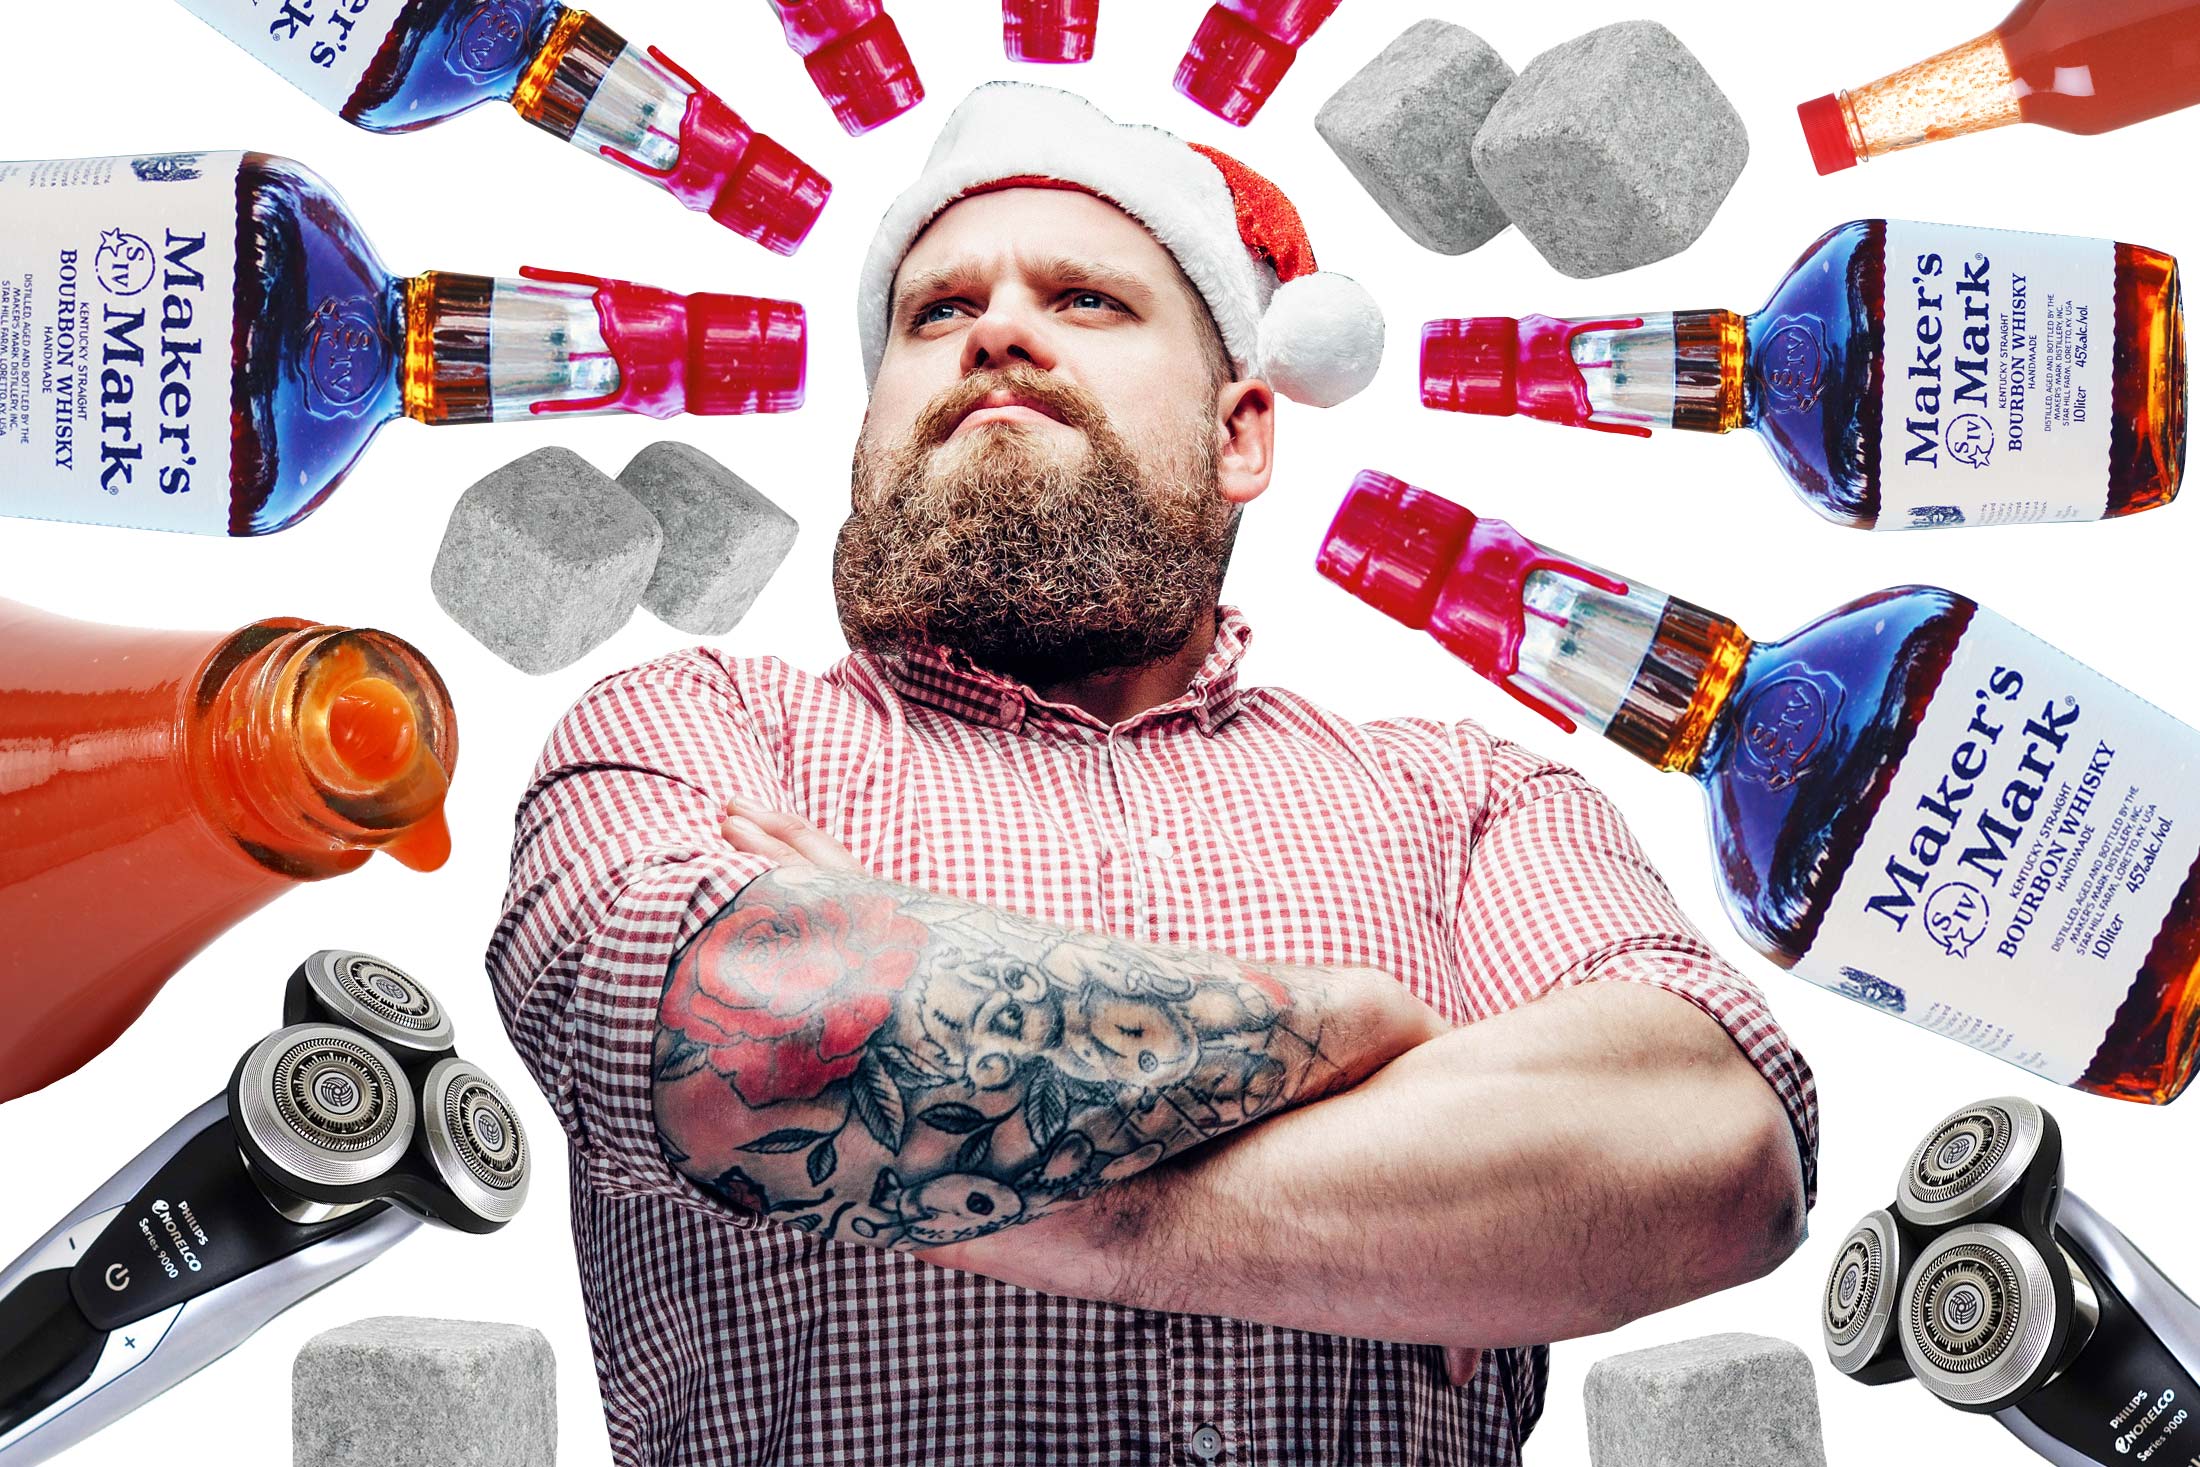 A man wearing a plaid shirt and Santa Claus hat surrounded by a mandala of whiskey hot sauce and beard trimming appliances.